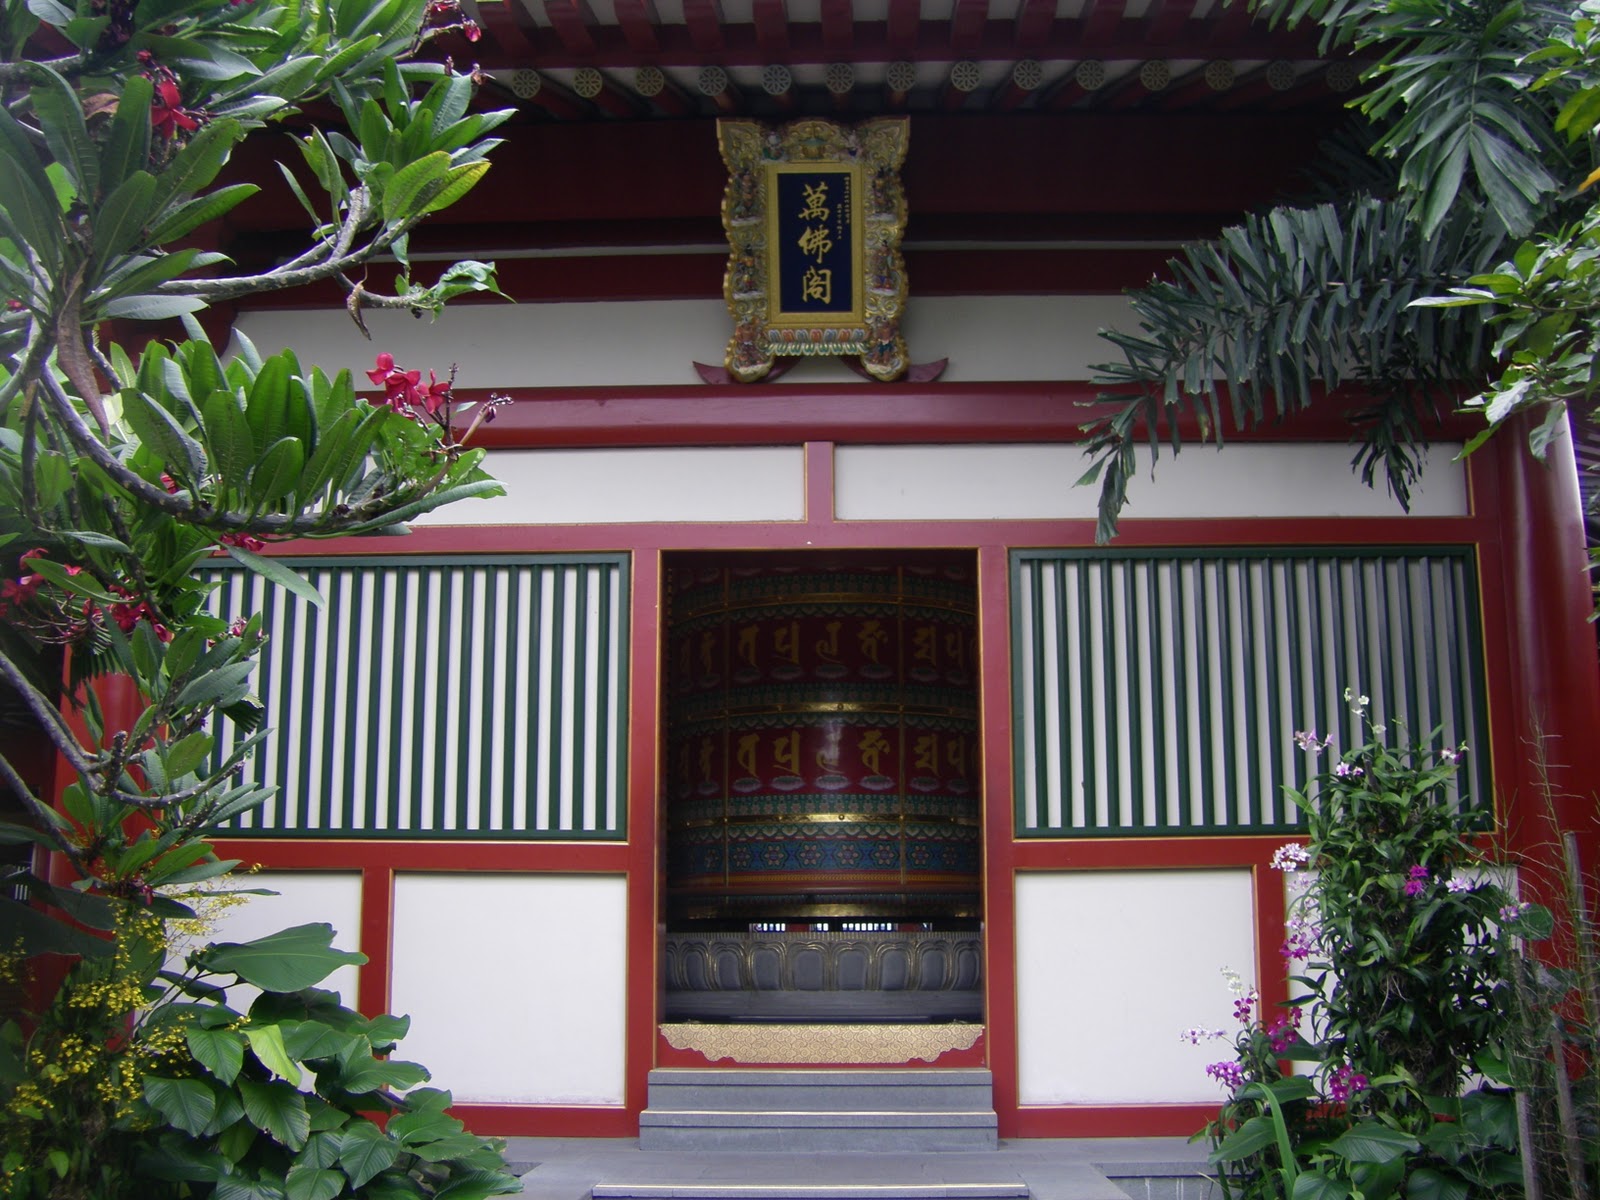 Buddha Tooth Relic Temple Roof Garden With Prayer Wheel